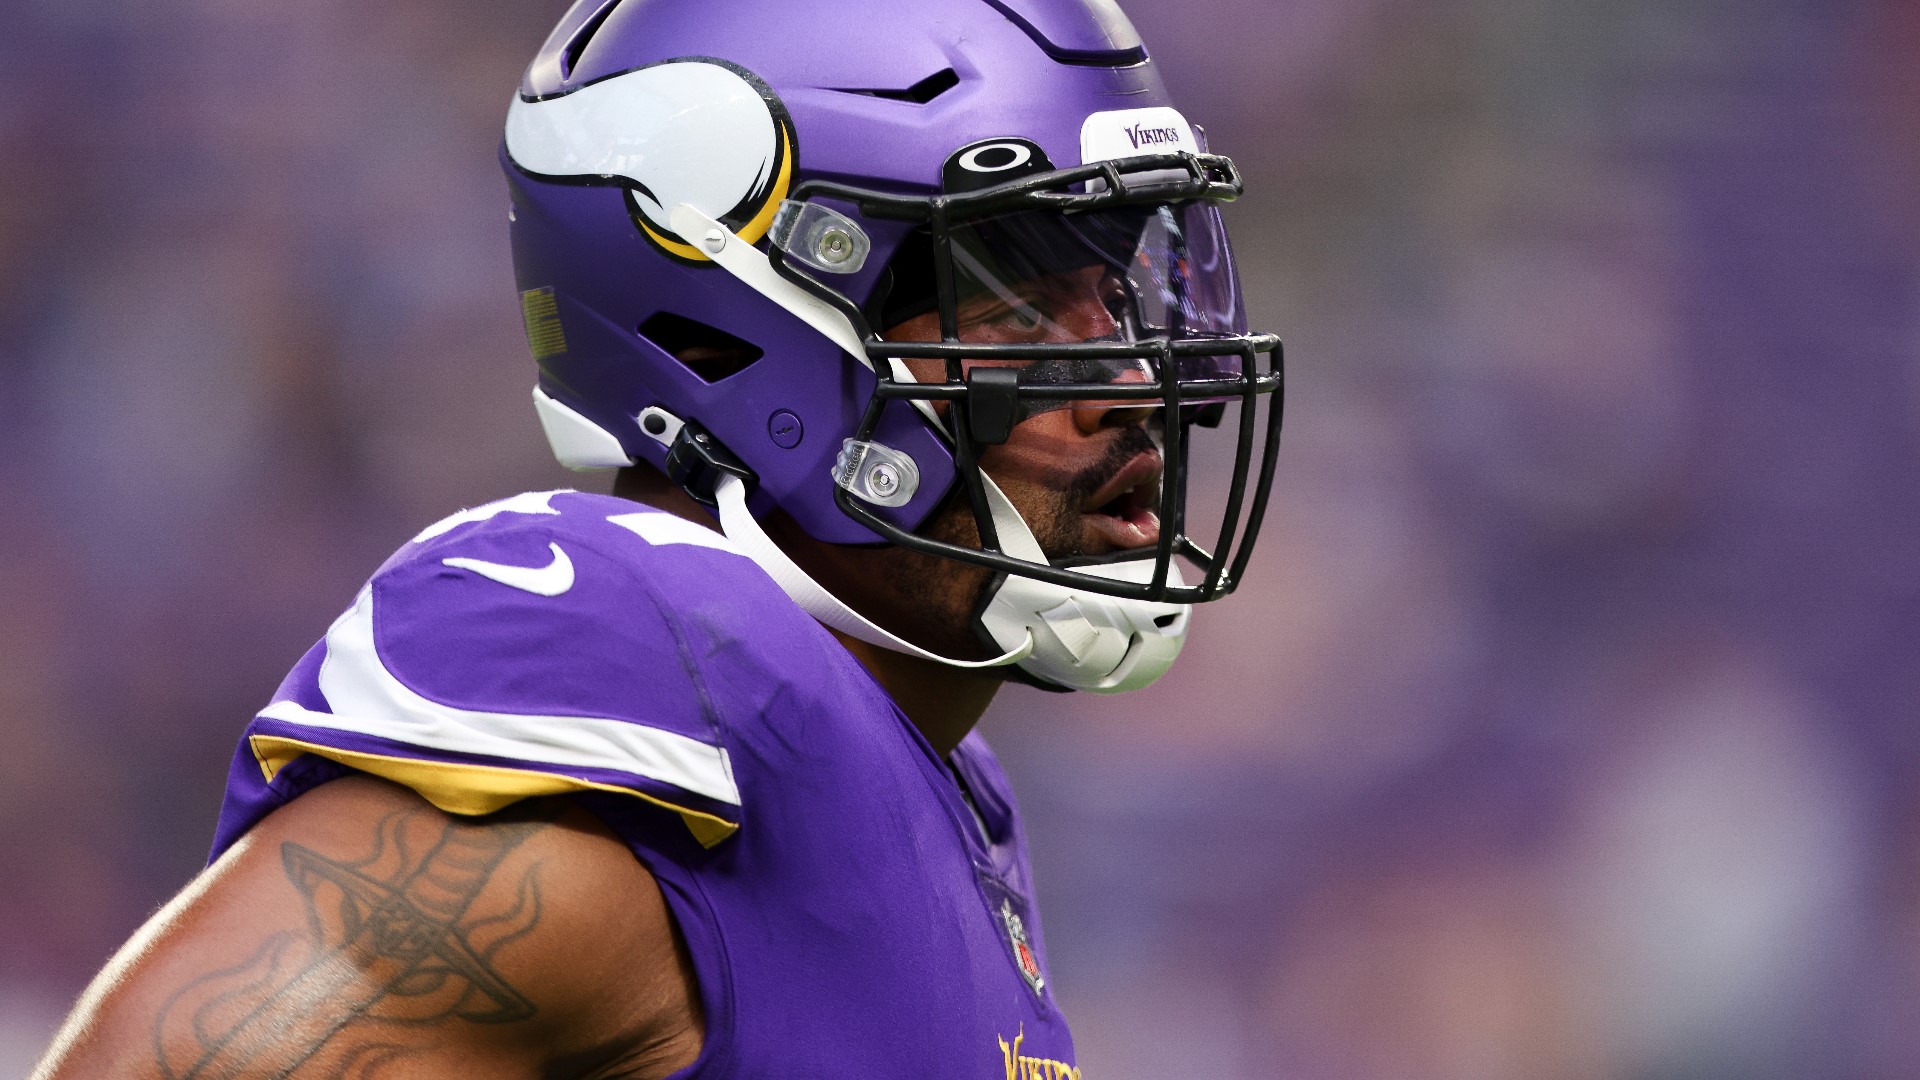 Griffen, who spent 11 seasons with the Vikings, was pulled over Saturday morning in Chanhassen.